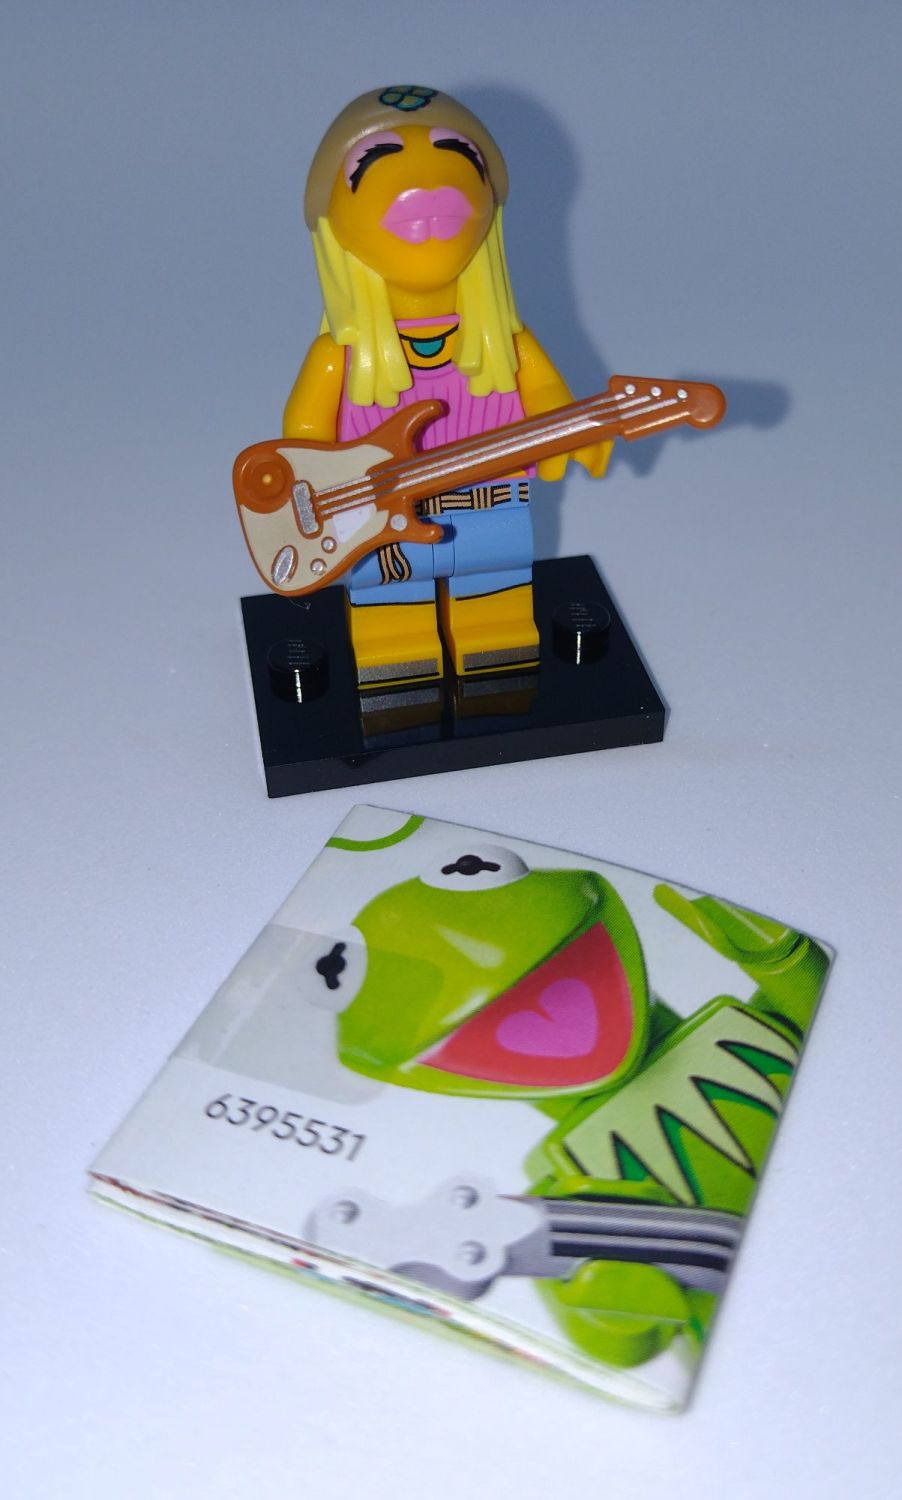 Lego - Disneys The Muppets - Limited Edition Minifigure - Janice